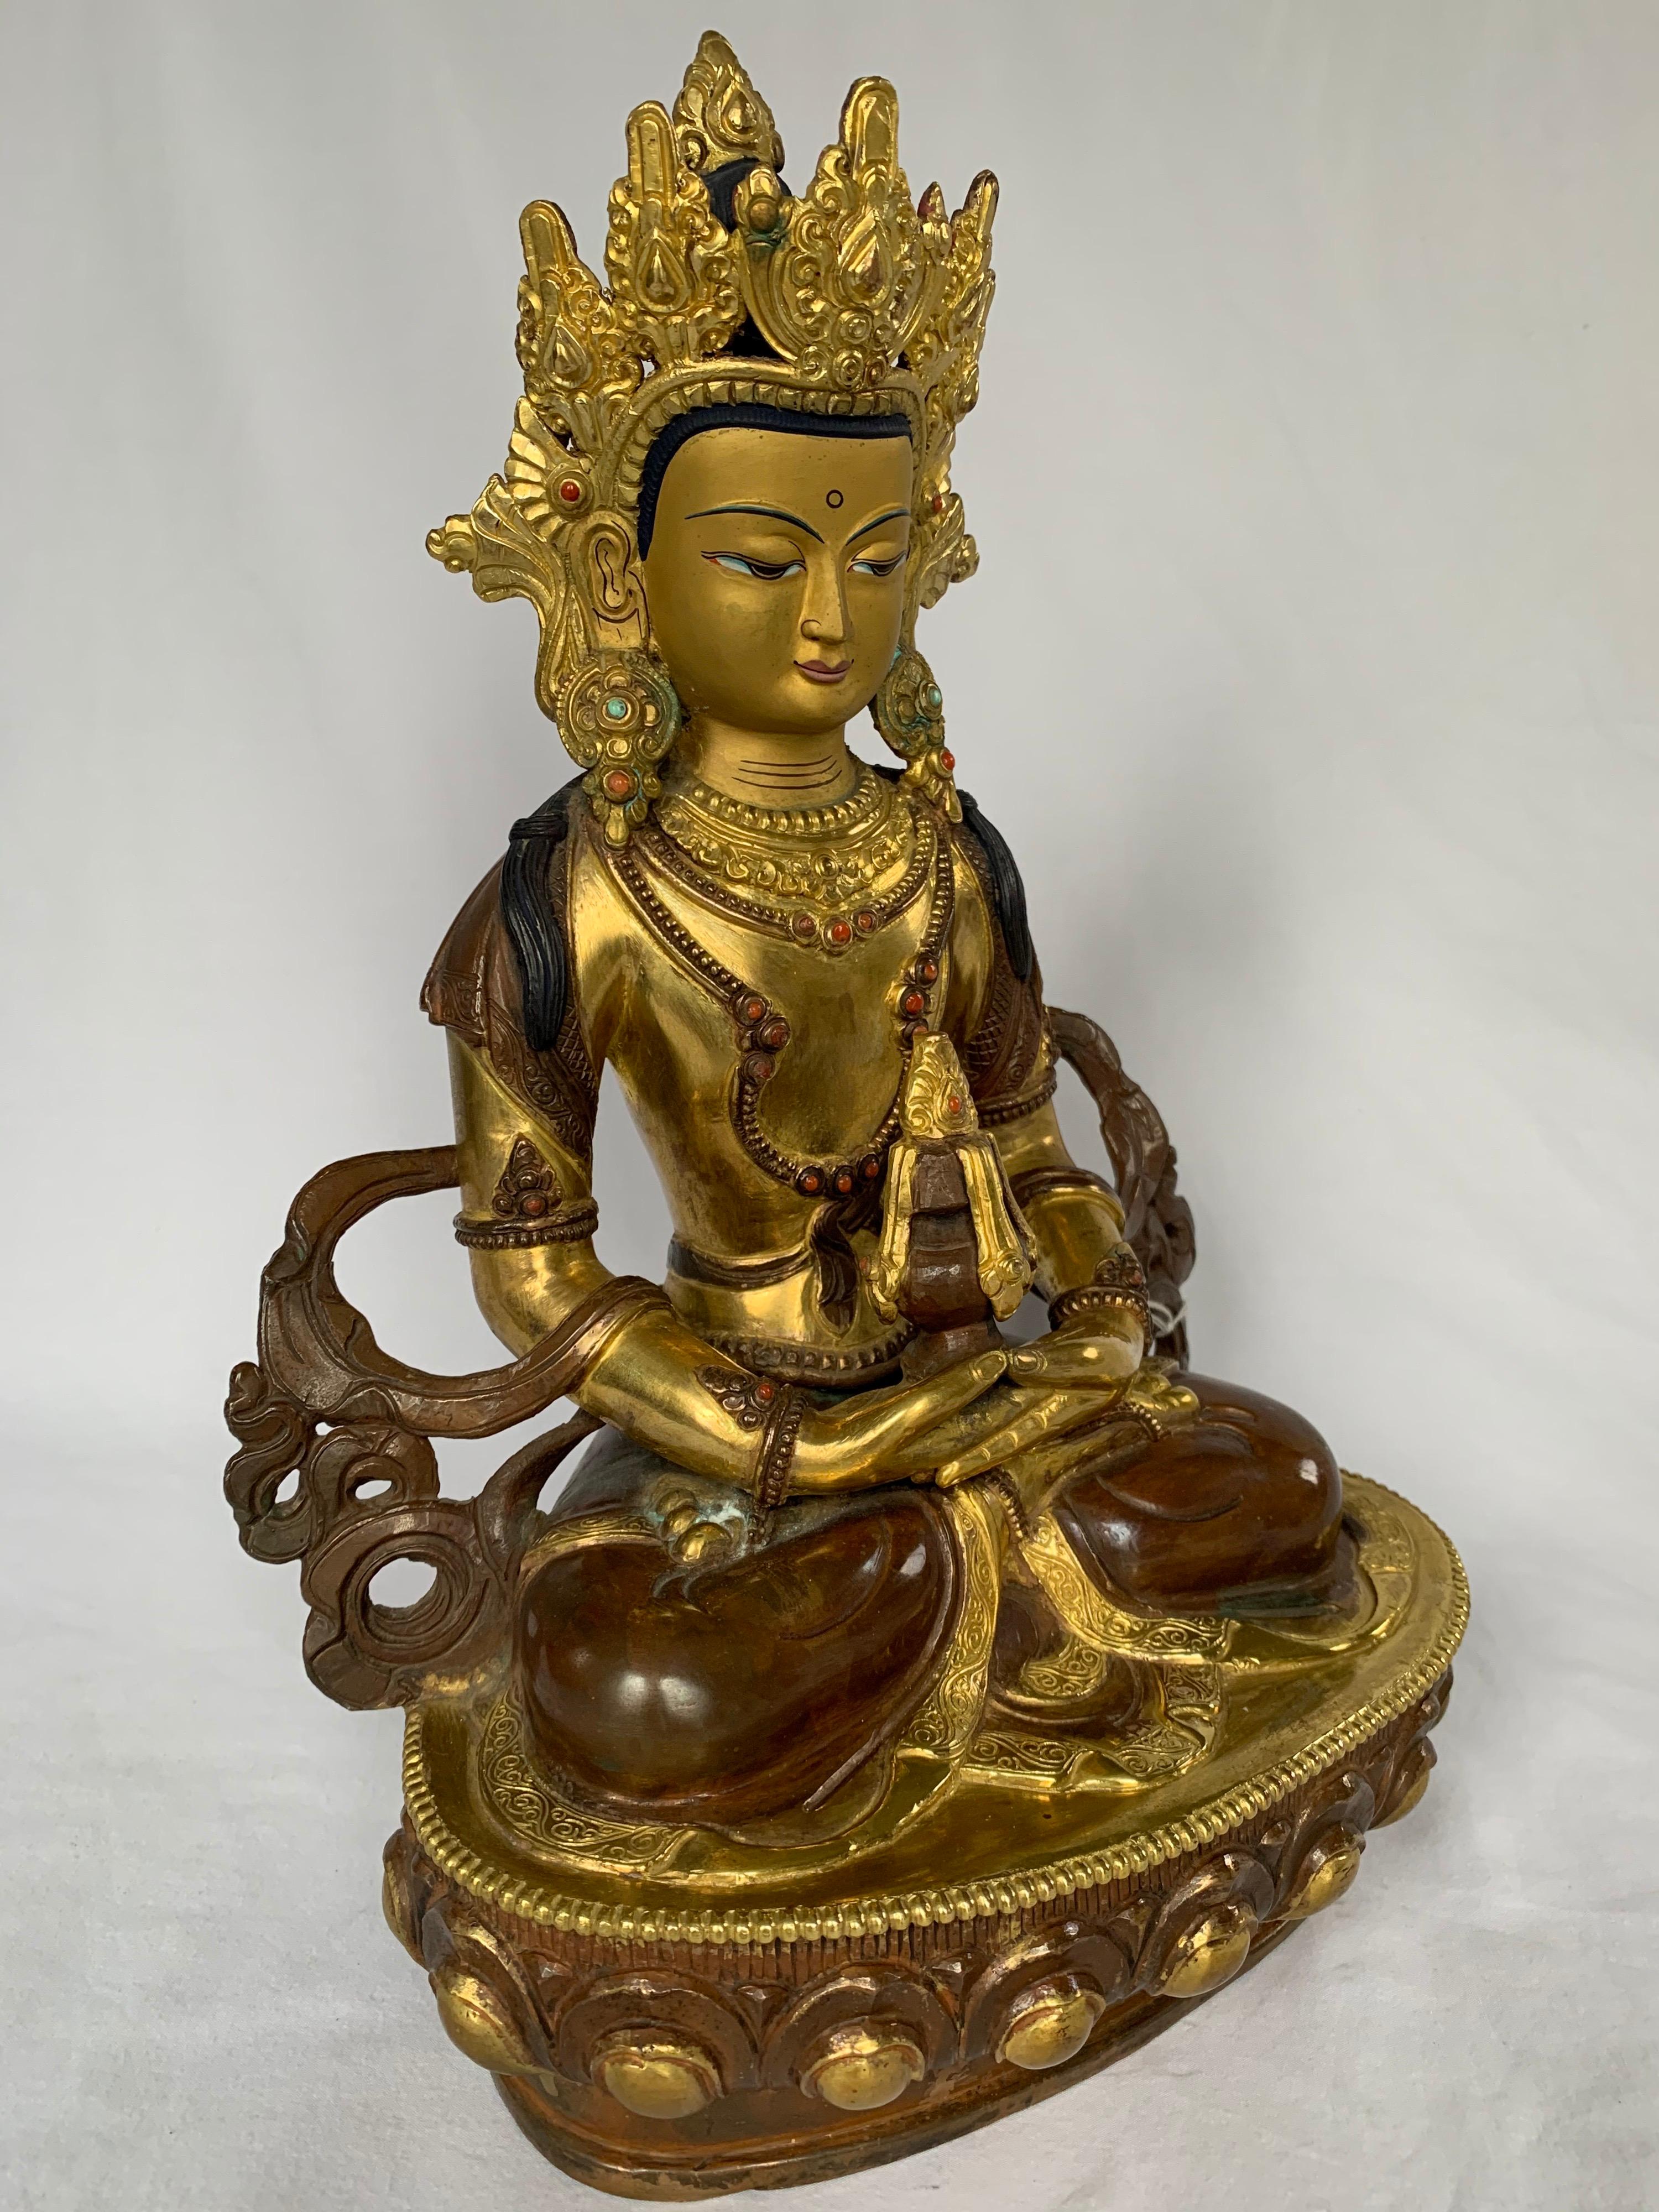 Aparmita Statue 12 Inch with 24K Gold Handcrafted by Lost Wax Process - Sculpture by Unknown